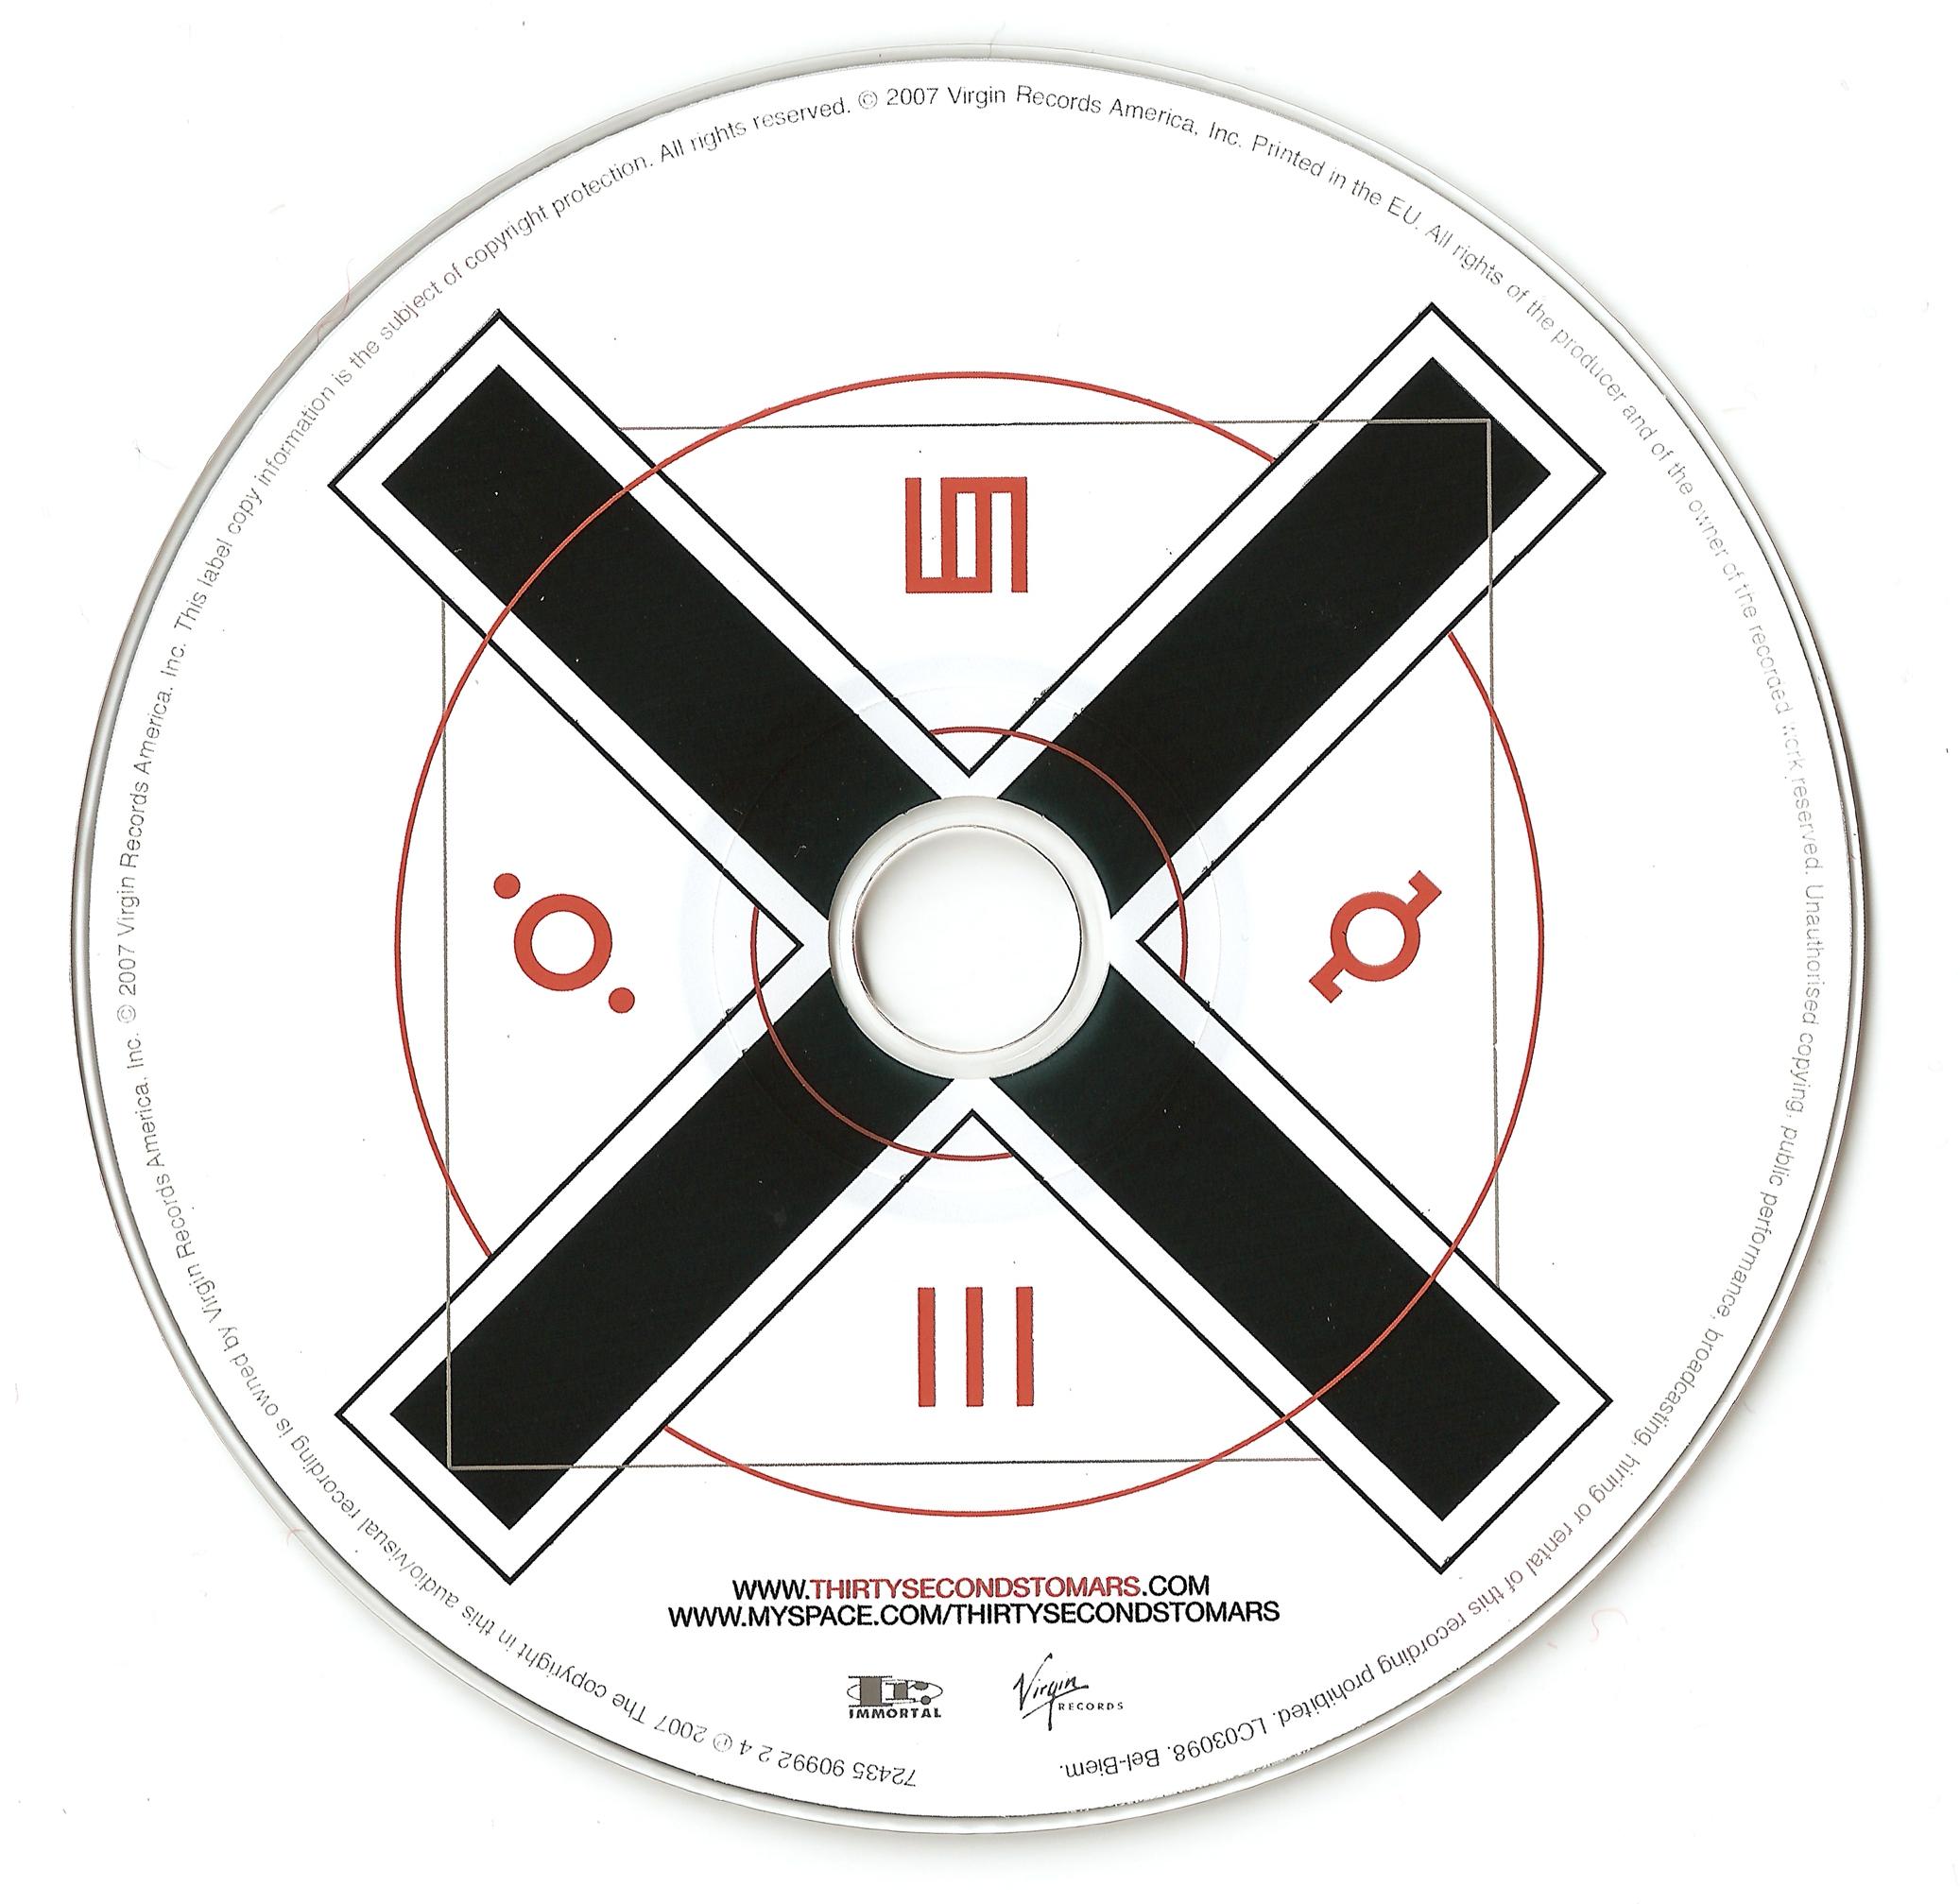 Cover - 30 Seconds To Mars - A Beautiful Lie - 2006 - CD.jpg